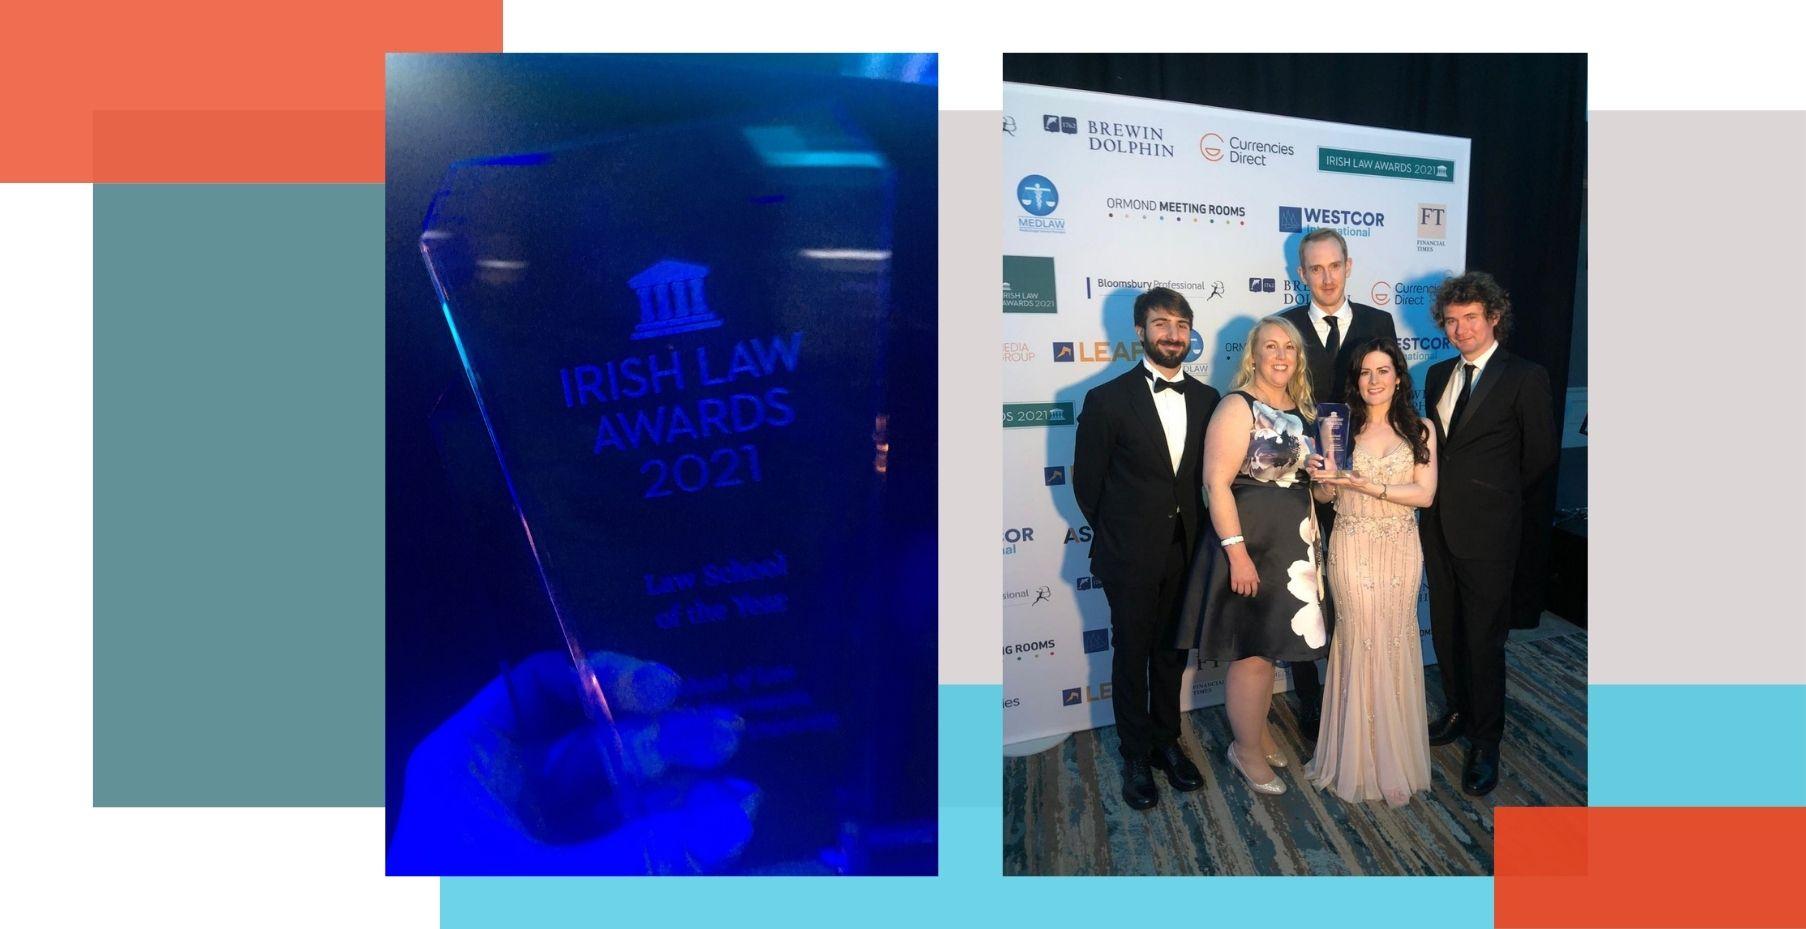 DCU's School of Law and Government is voted Law School of the Year 2021